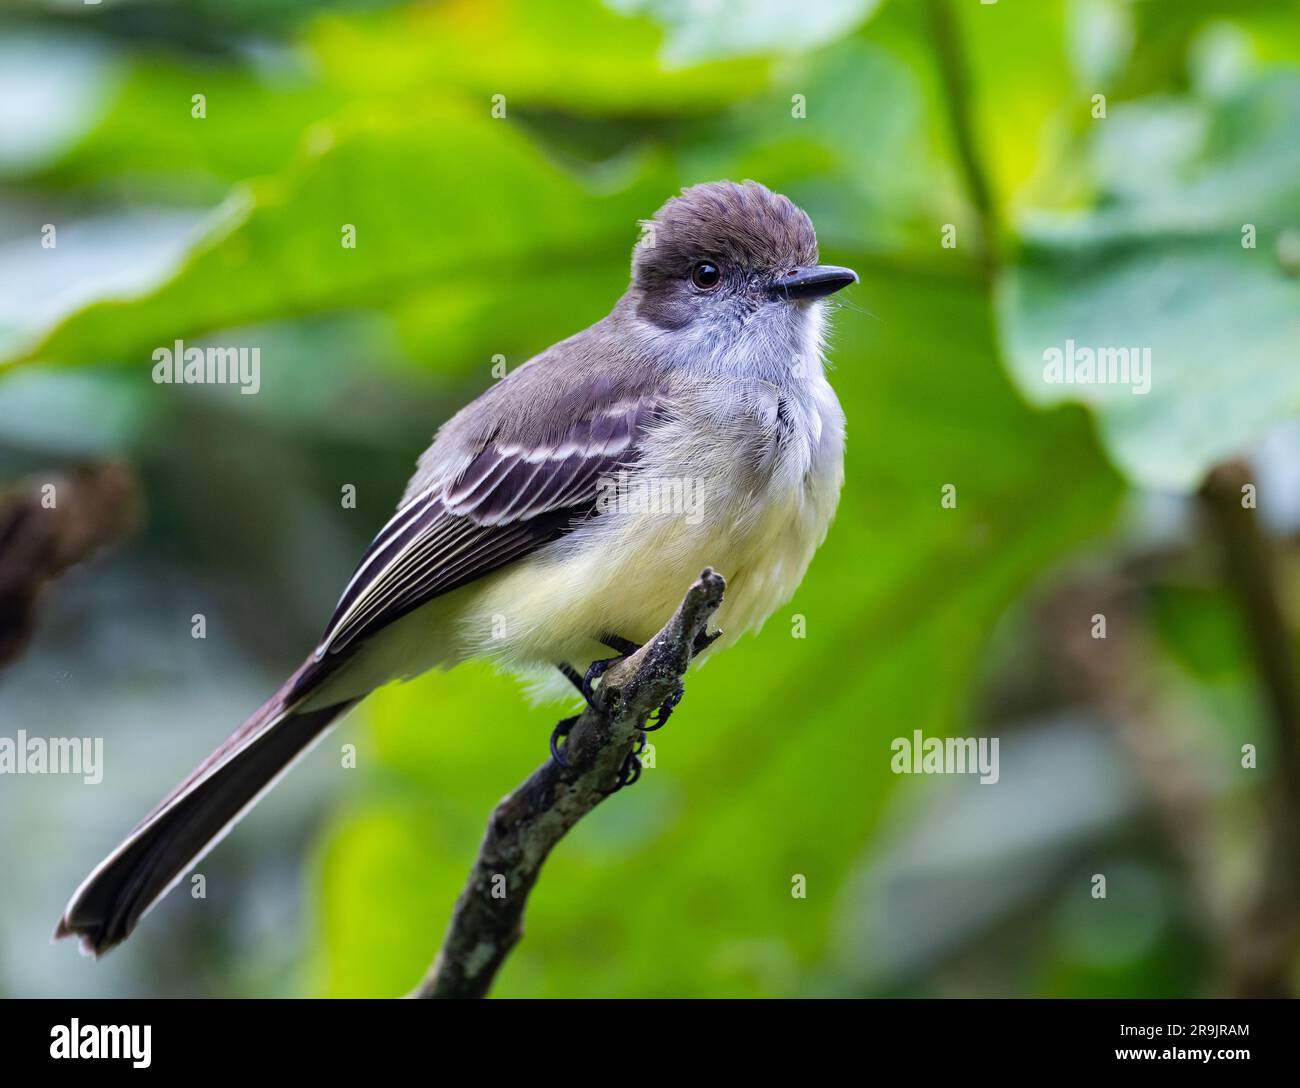 A Pale-edged Flycatcher (Myiarchus cephalotes) perched on a branch. Colombia, South America. Stock Photo